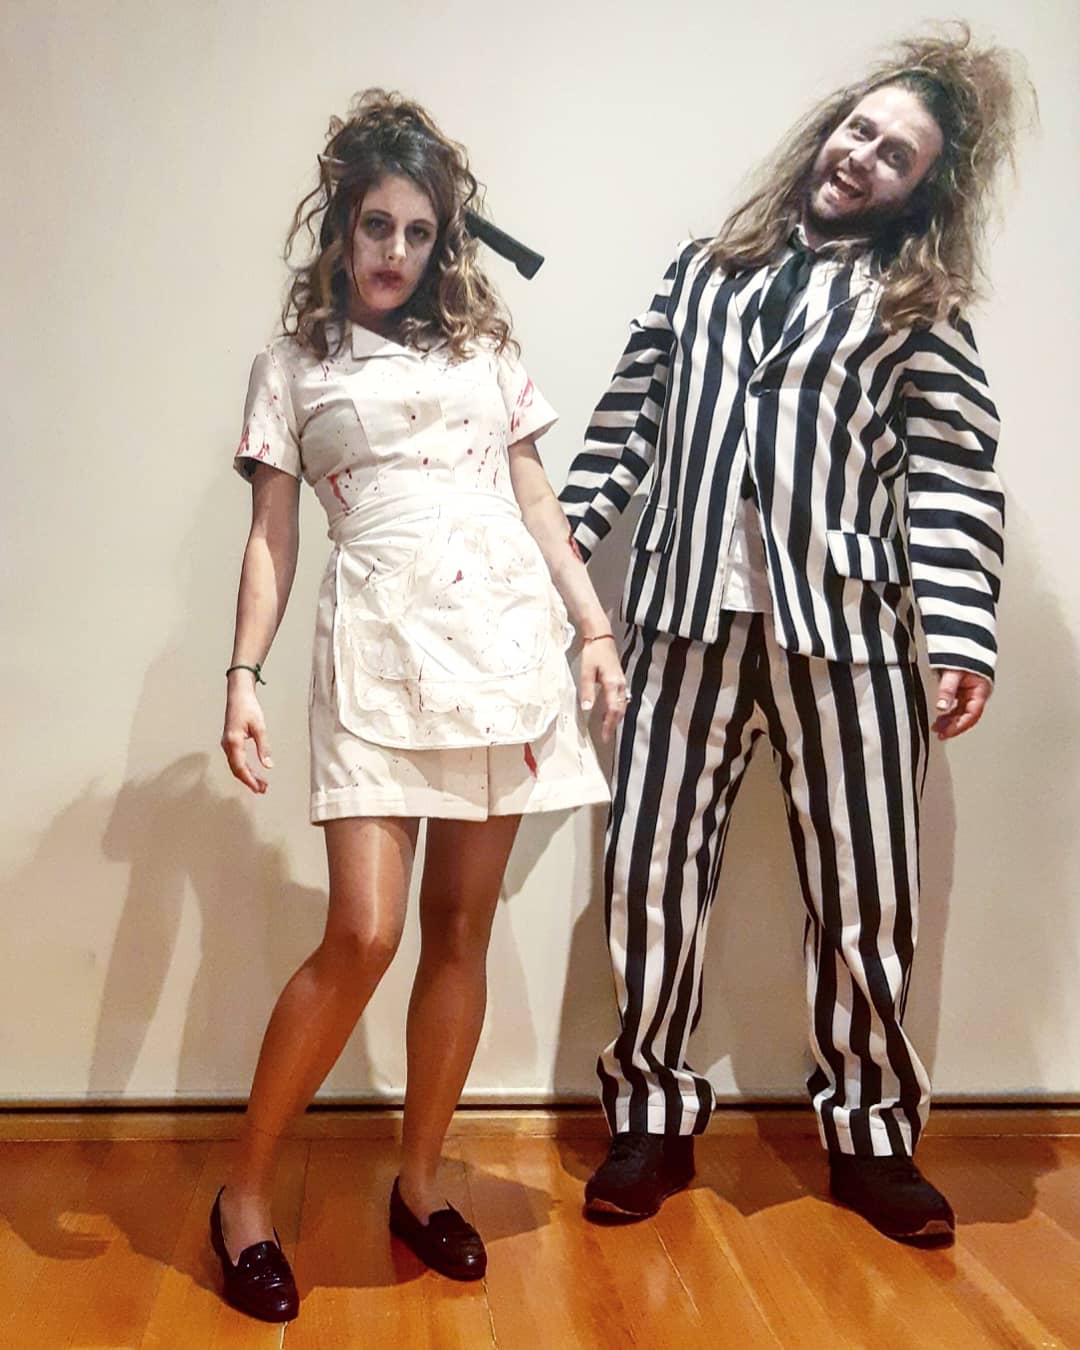 Featured image for “Beetlejuice 1”